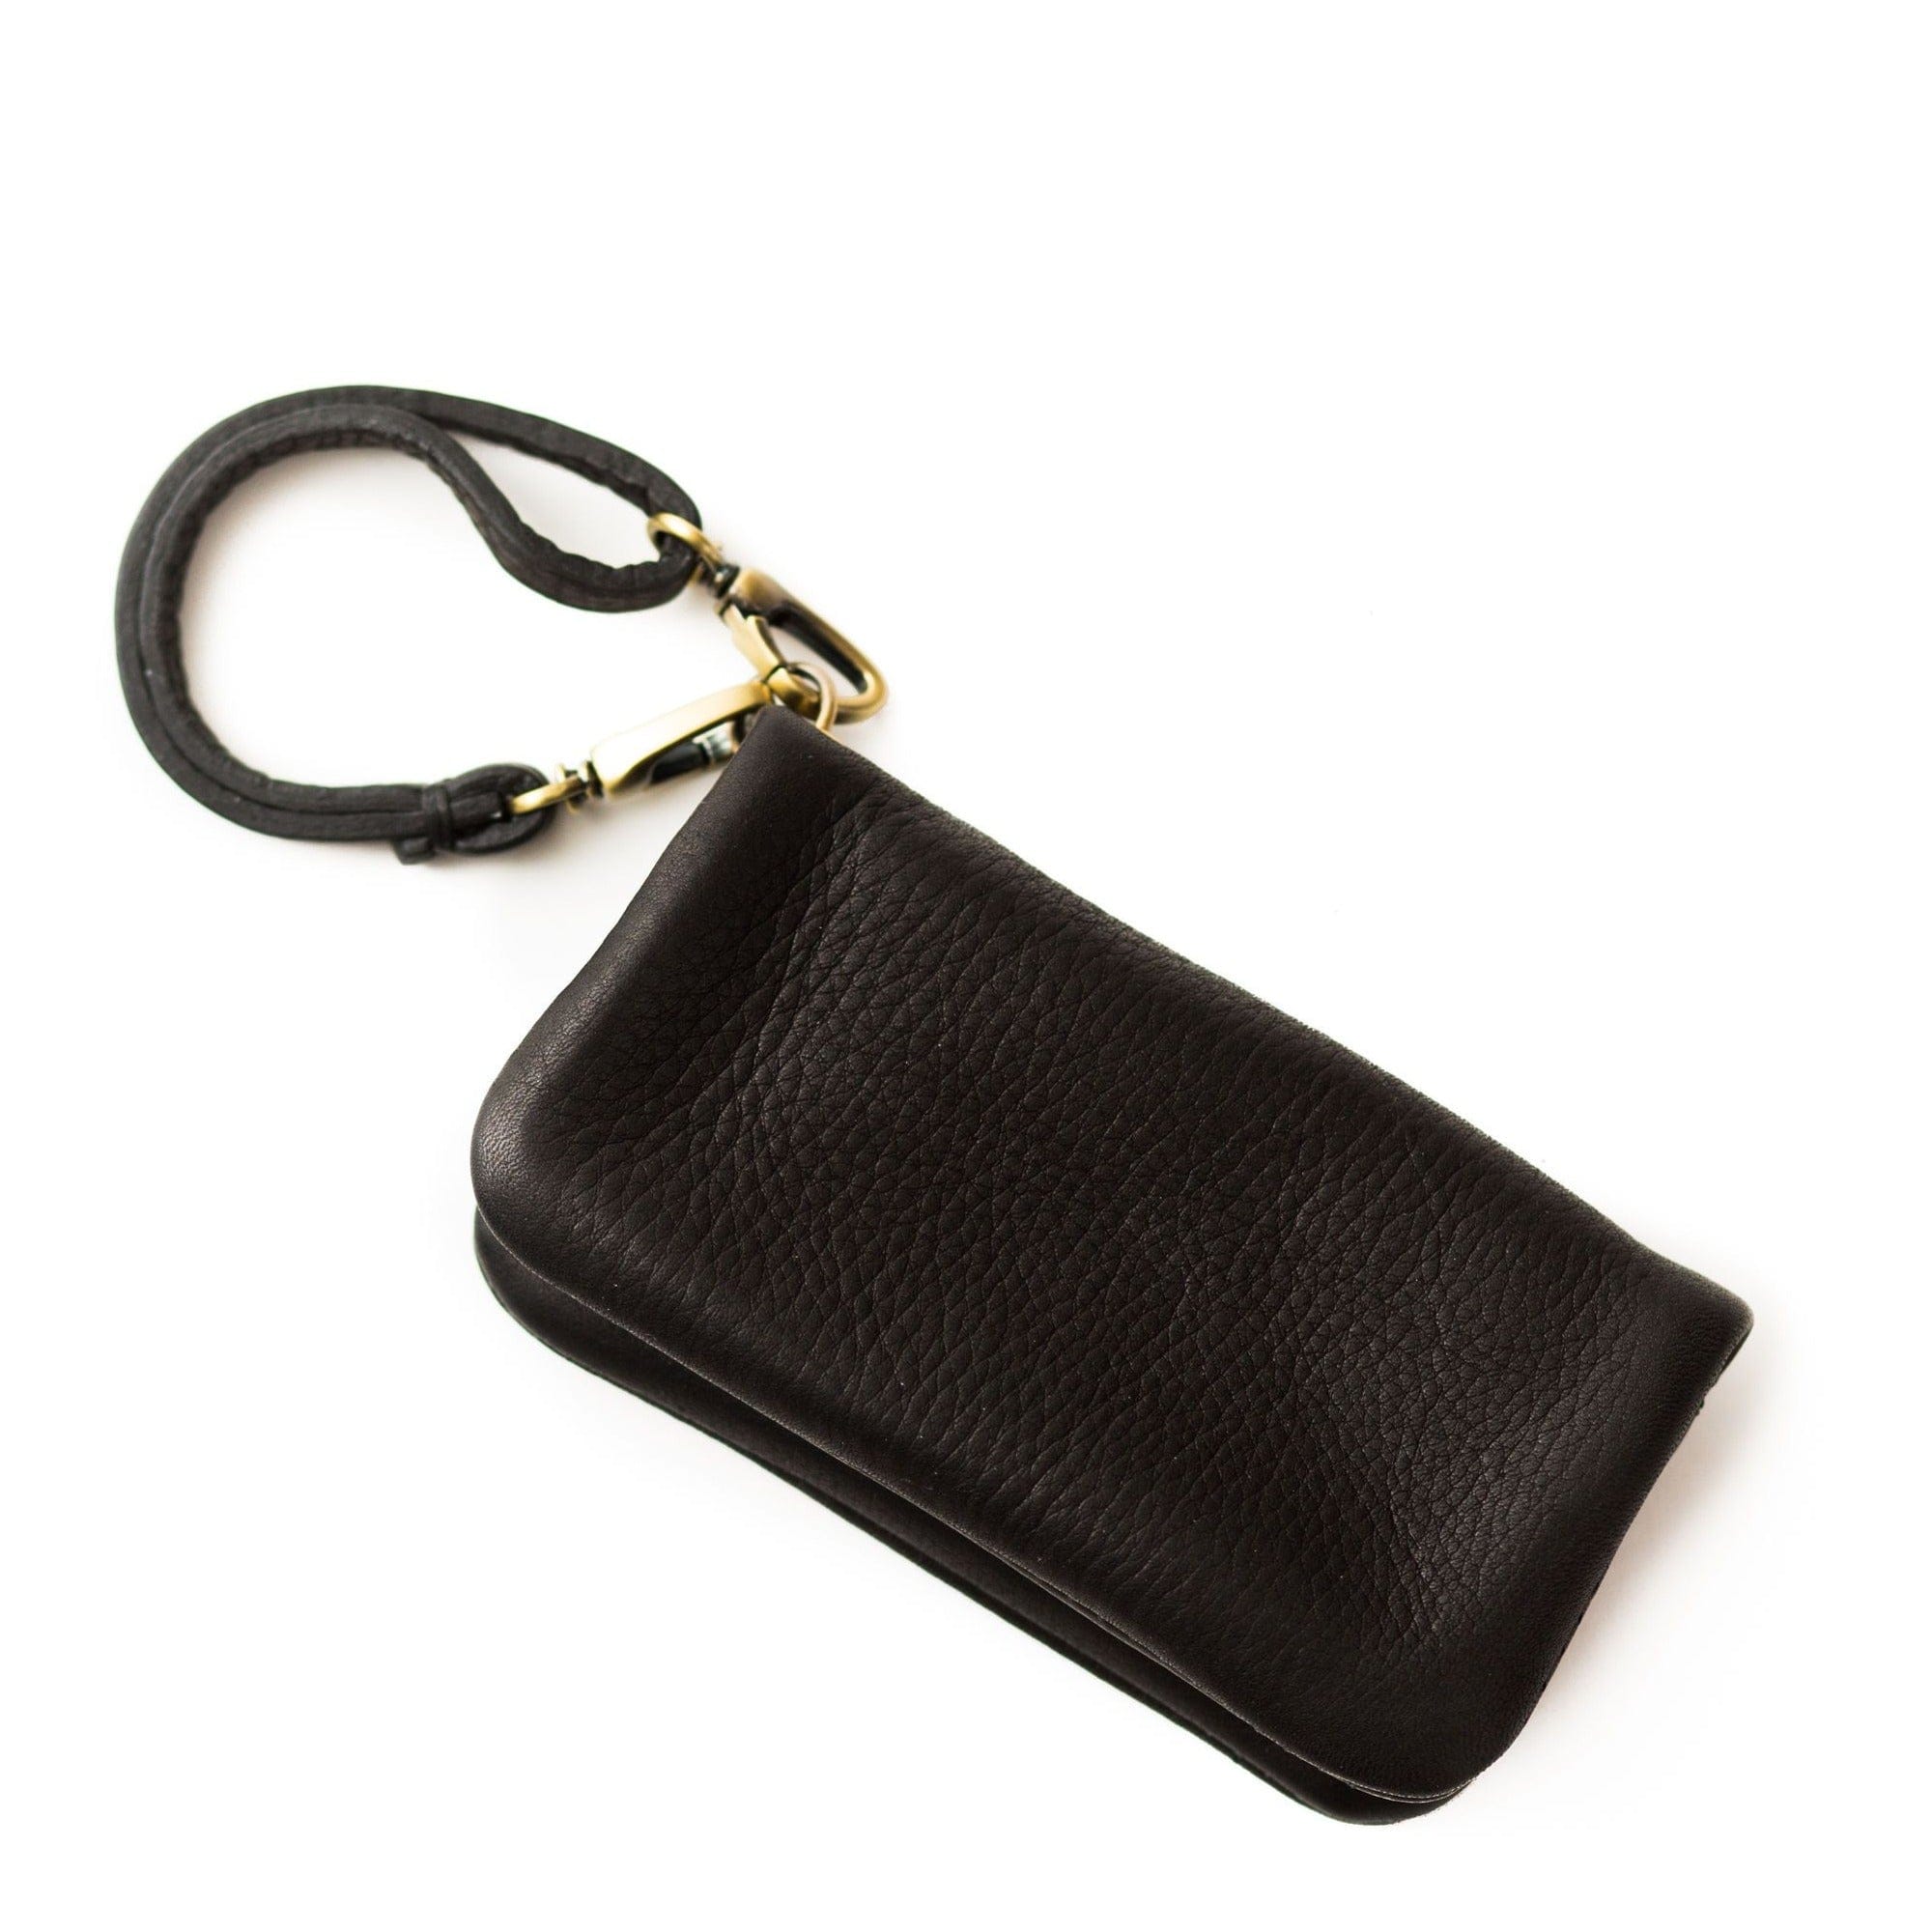 The Woo card holder in black raw leather is sleek and minimal and can be used as a wallet, wristlet, or keychain addition.